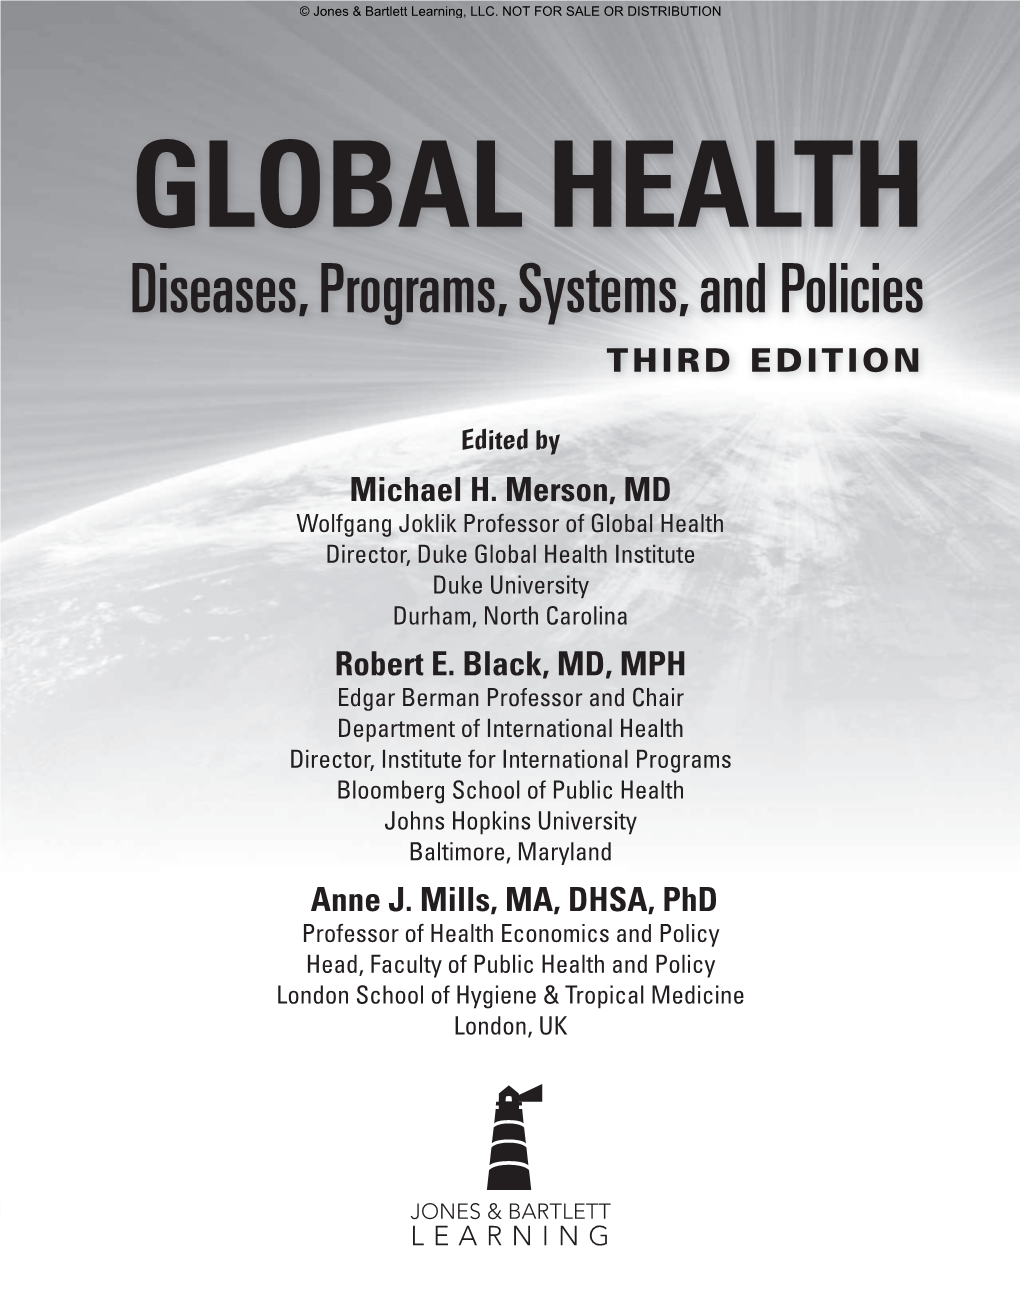 Global Health: Diseases, Programs, Systems and Policies / [Edited By] Michael H